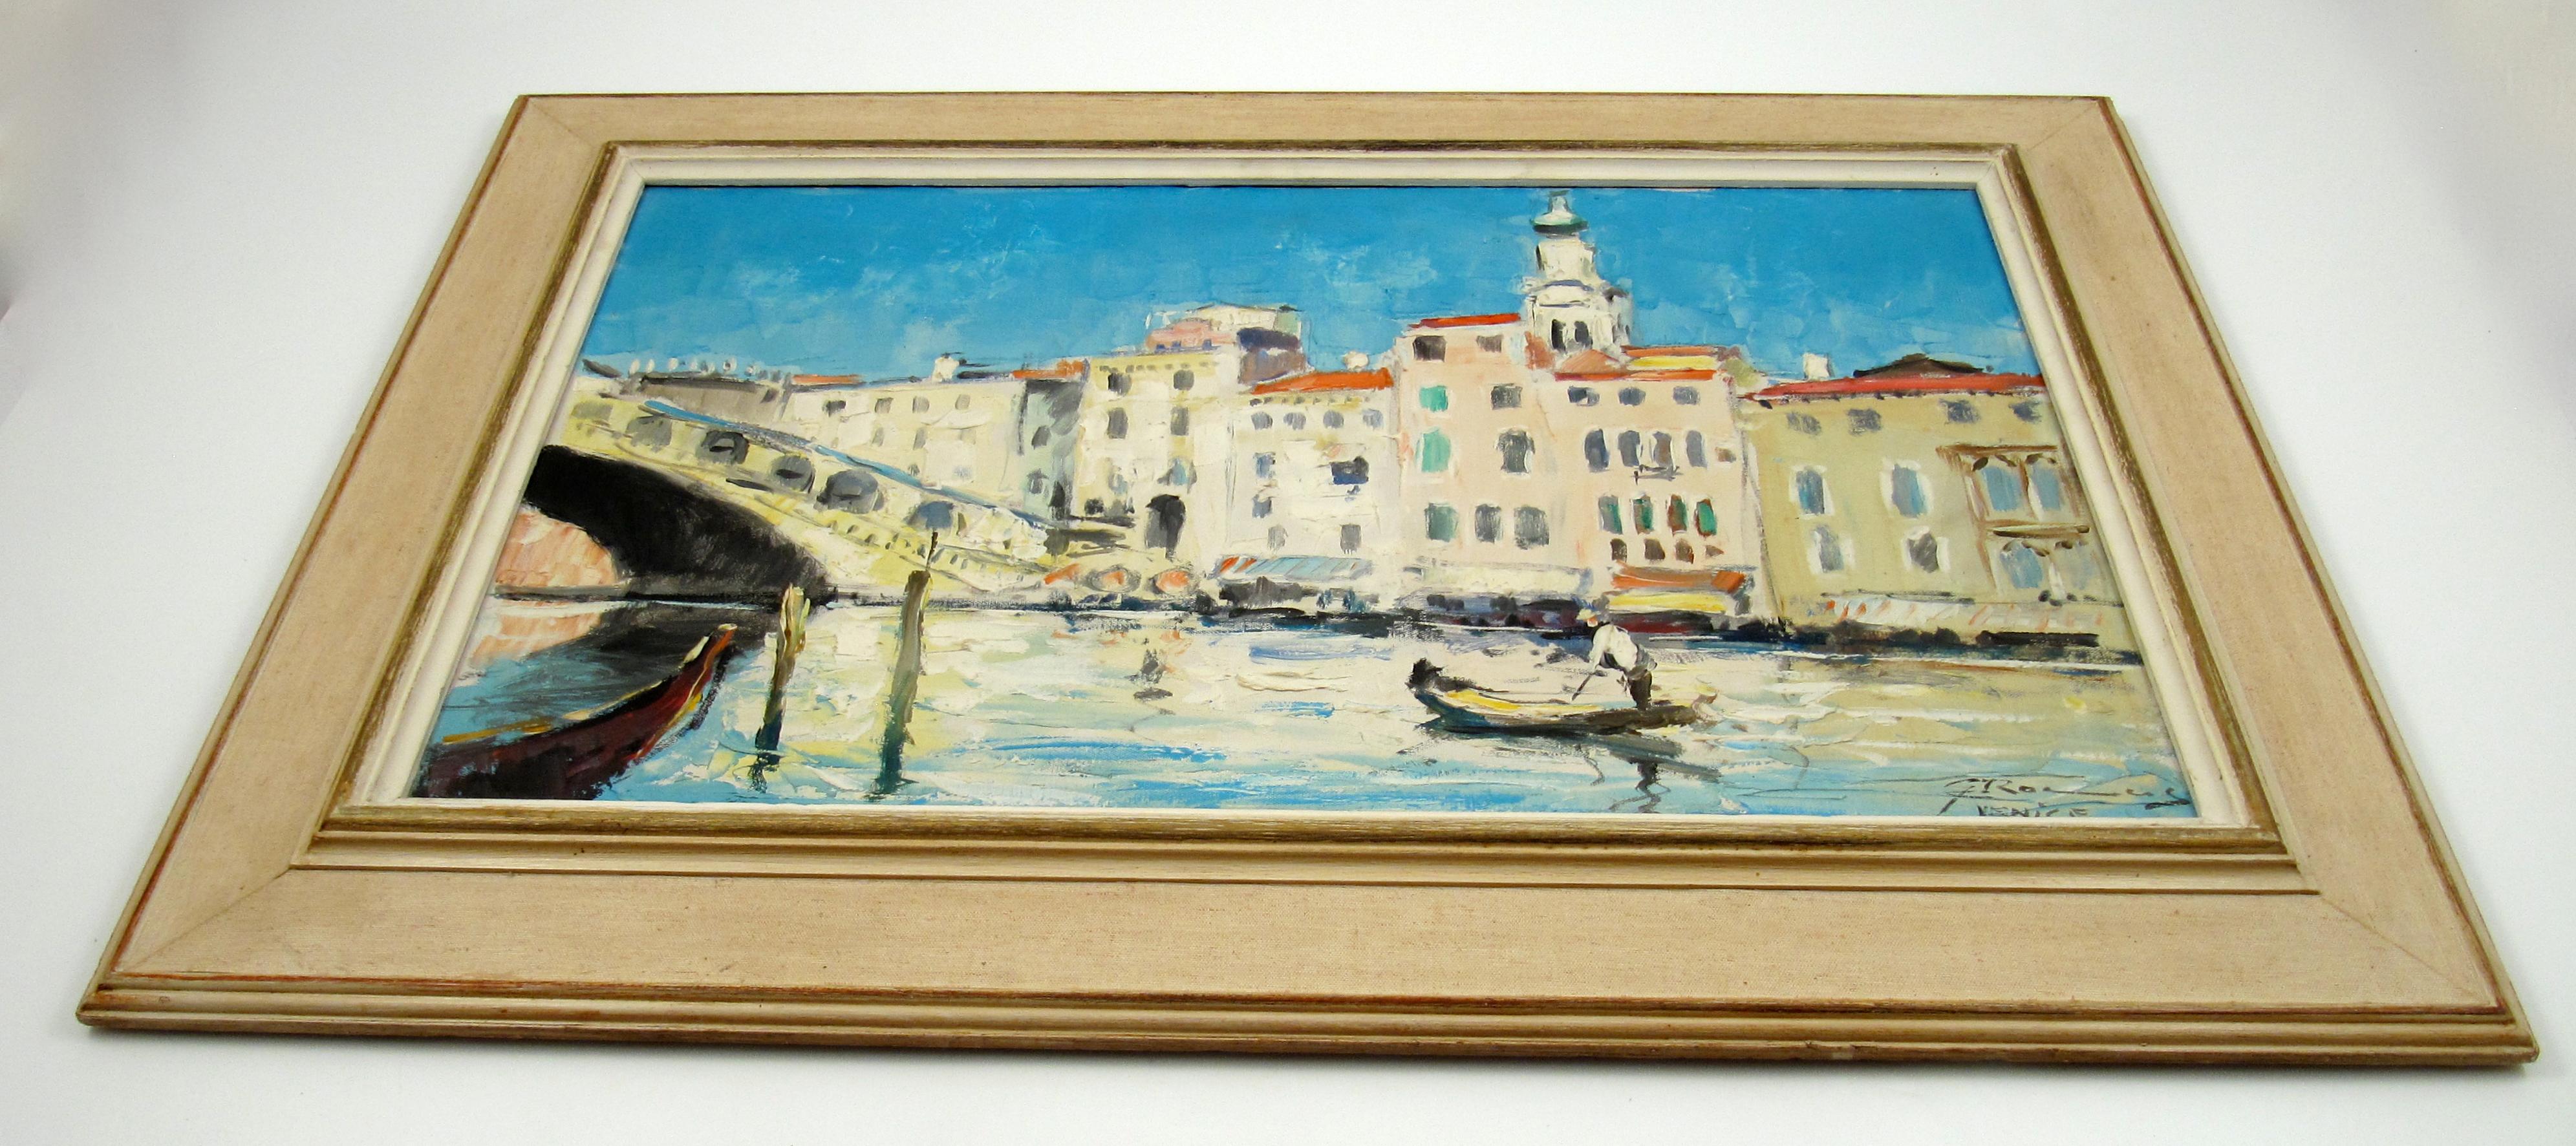 Gerhard Cohn Roemers
(German, 1900 - 1965)

Ponte Del Rialto in Venice
•	Oil on canvas, ca. 40 x 65 cm
•	Frame, ca. 57 x 82 cm
•	Signed and titled lower right corner

Gerhard Cohn Roemers paintings depicting scenes from all over Europe and North